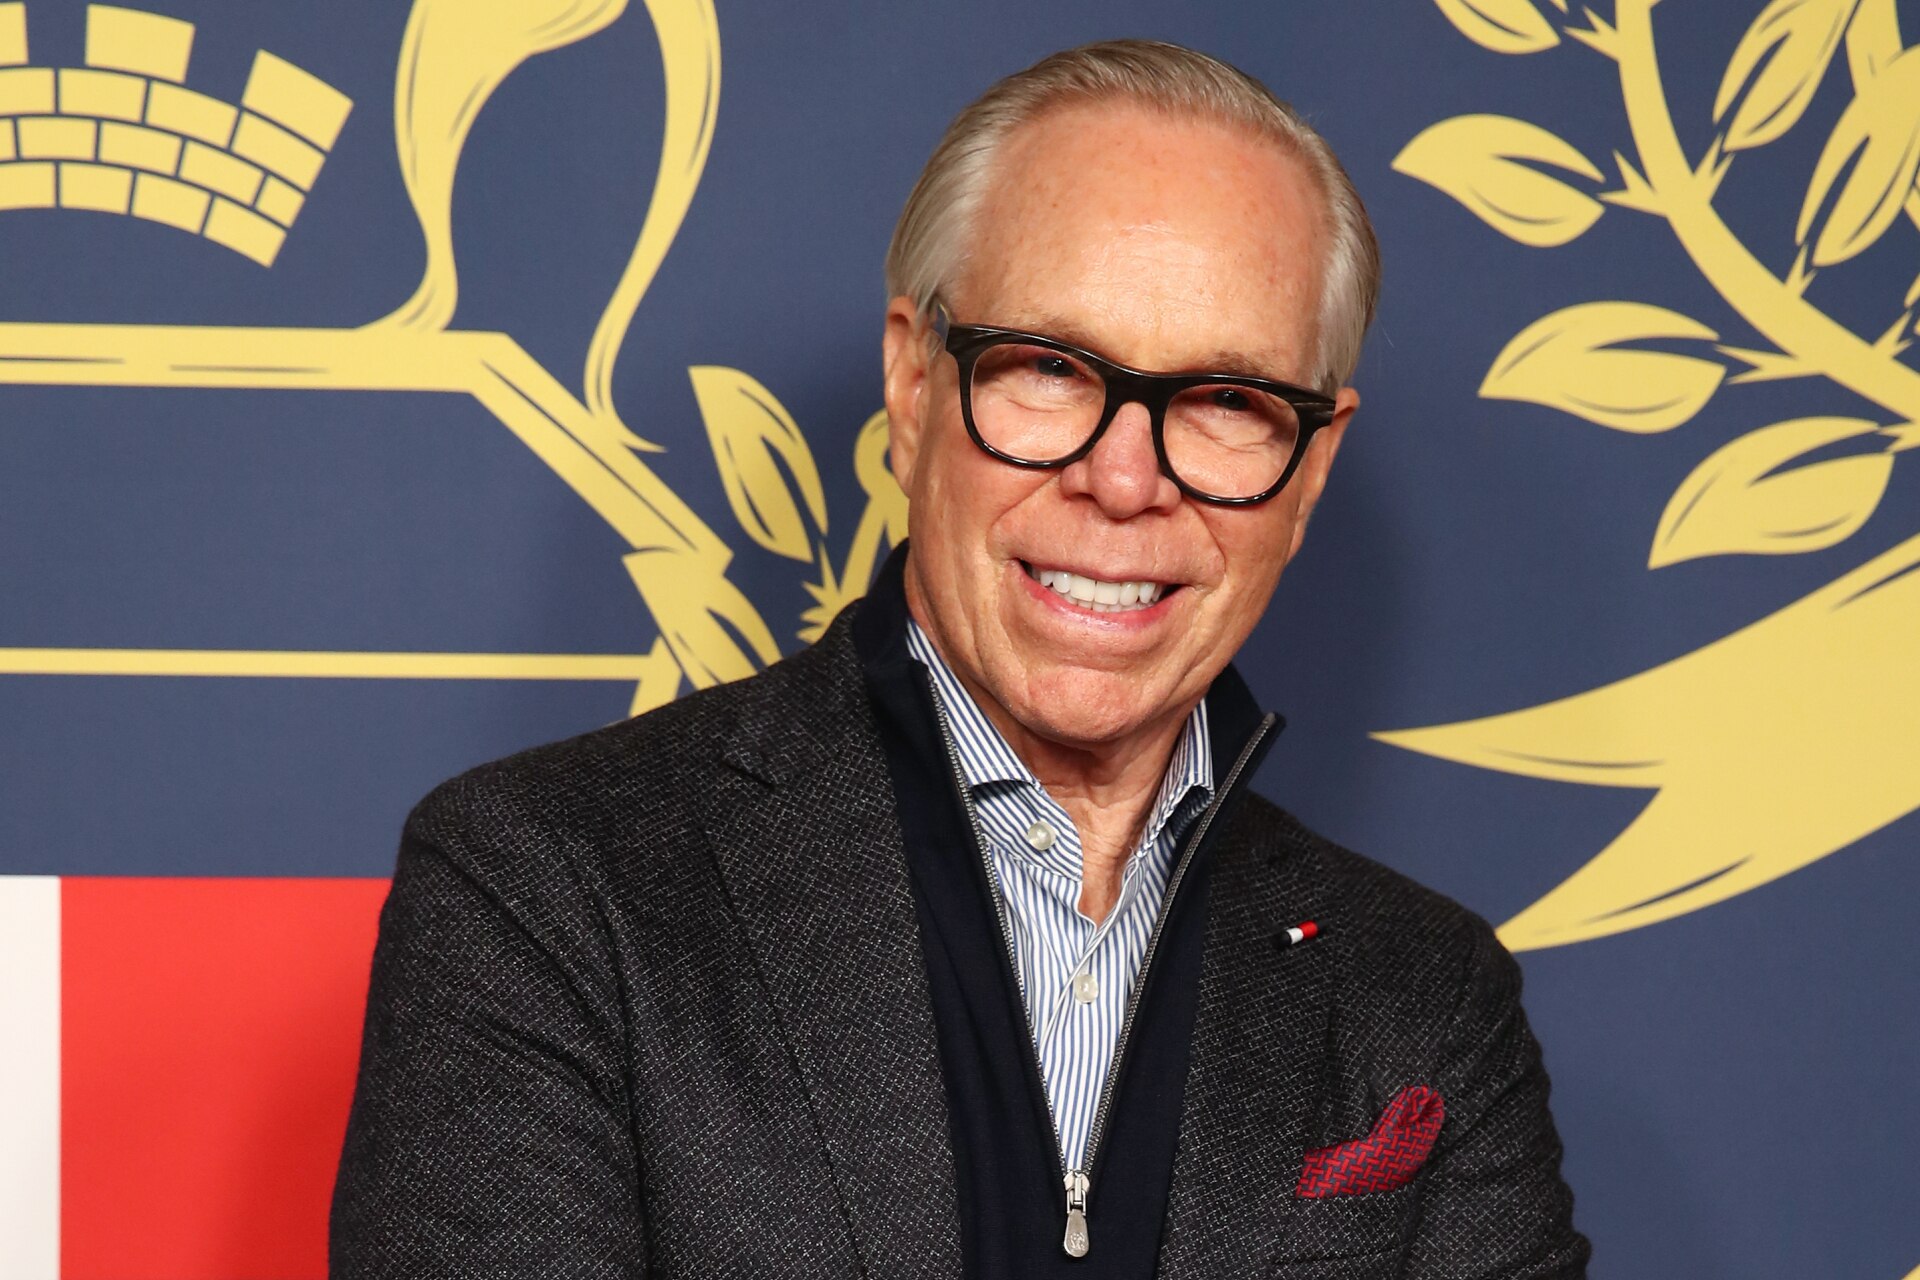 Tommy Hilfiger shares what Gigi Hadid and Zendaya have taught him about fashion